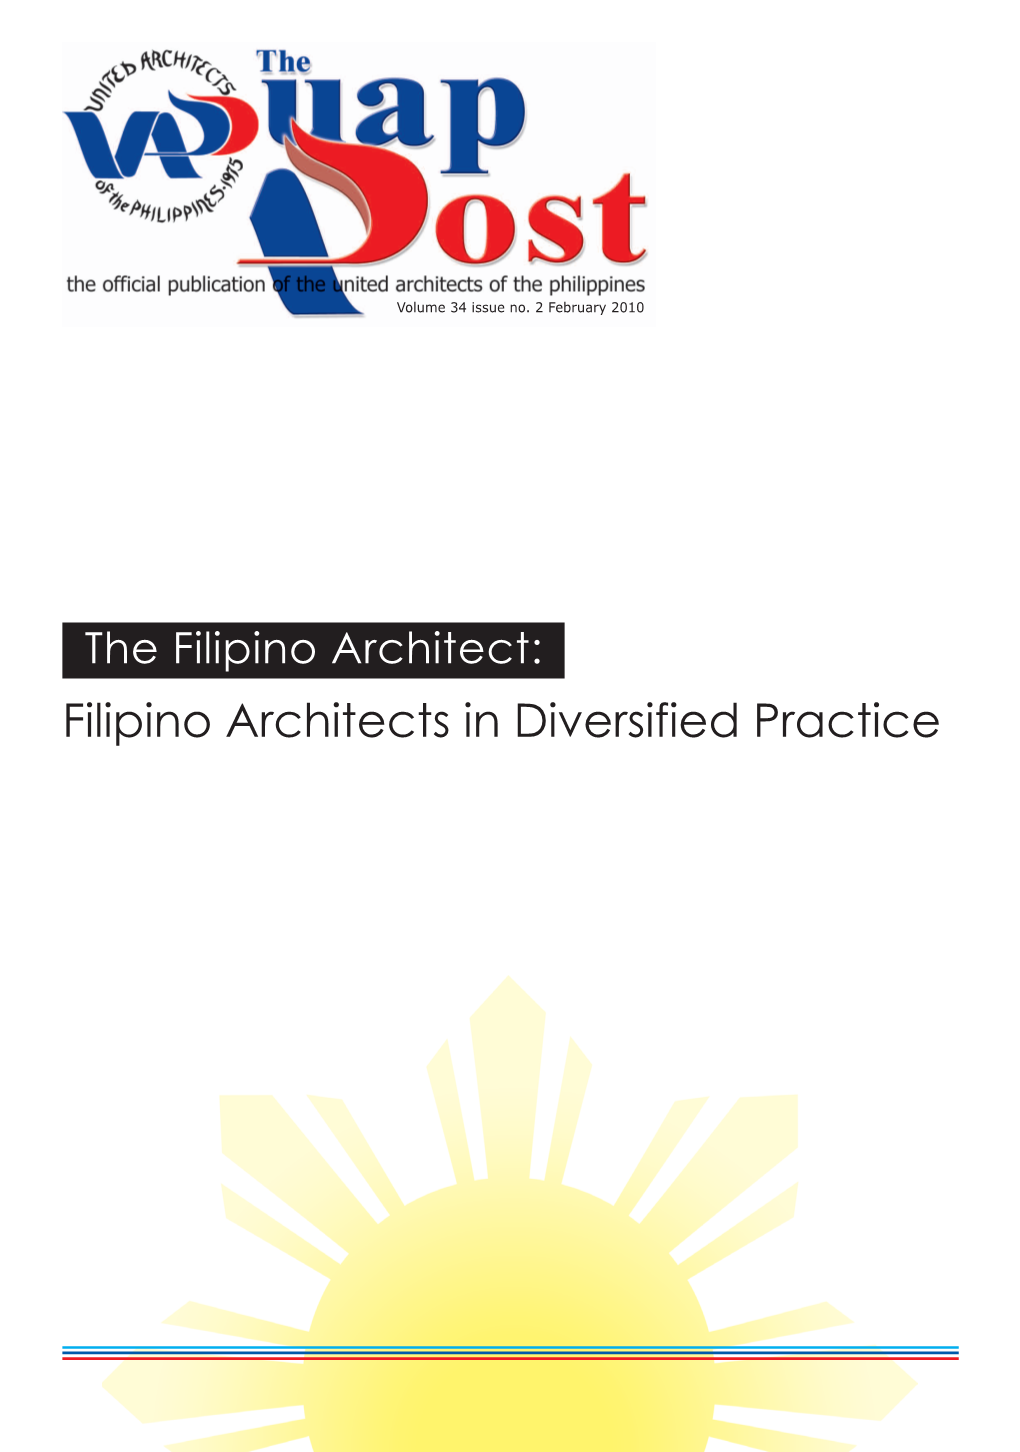 Filipino Architects in Diversified Practice Report Theme